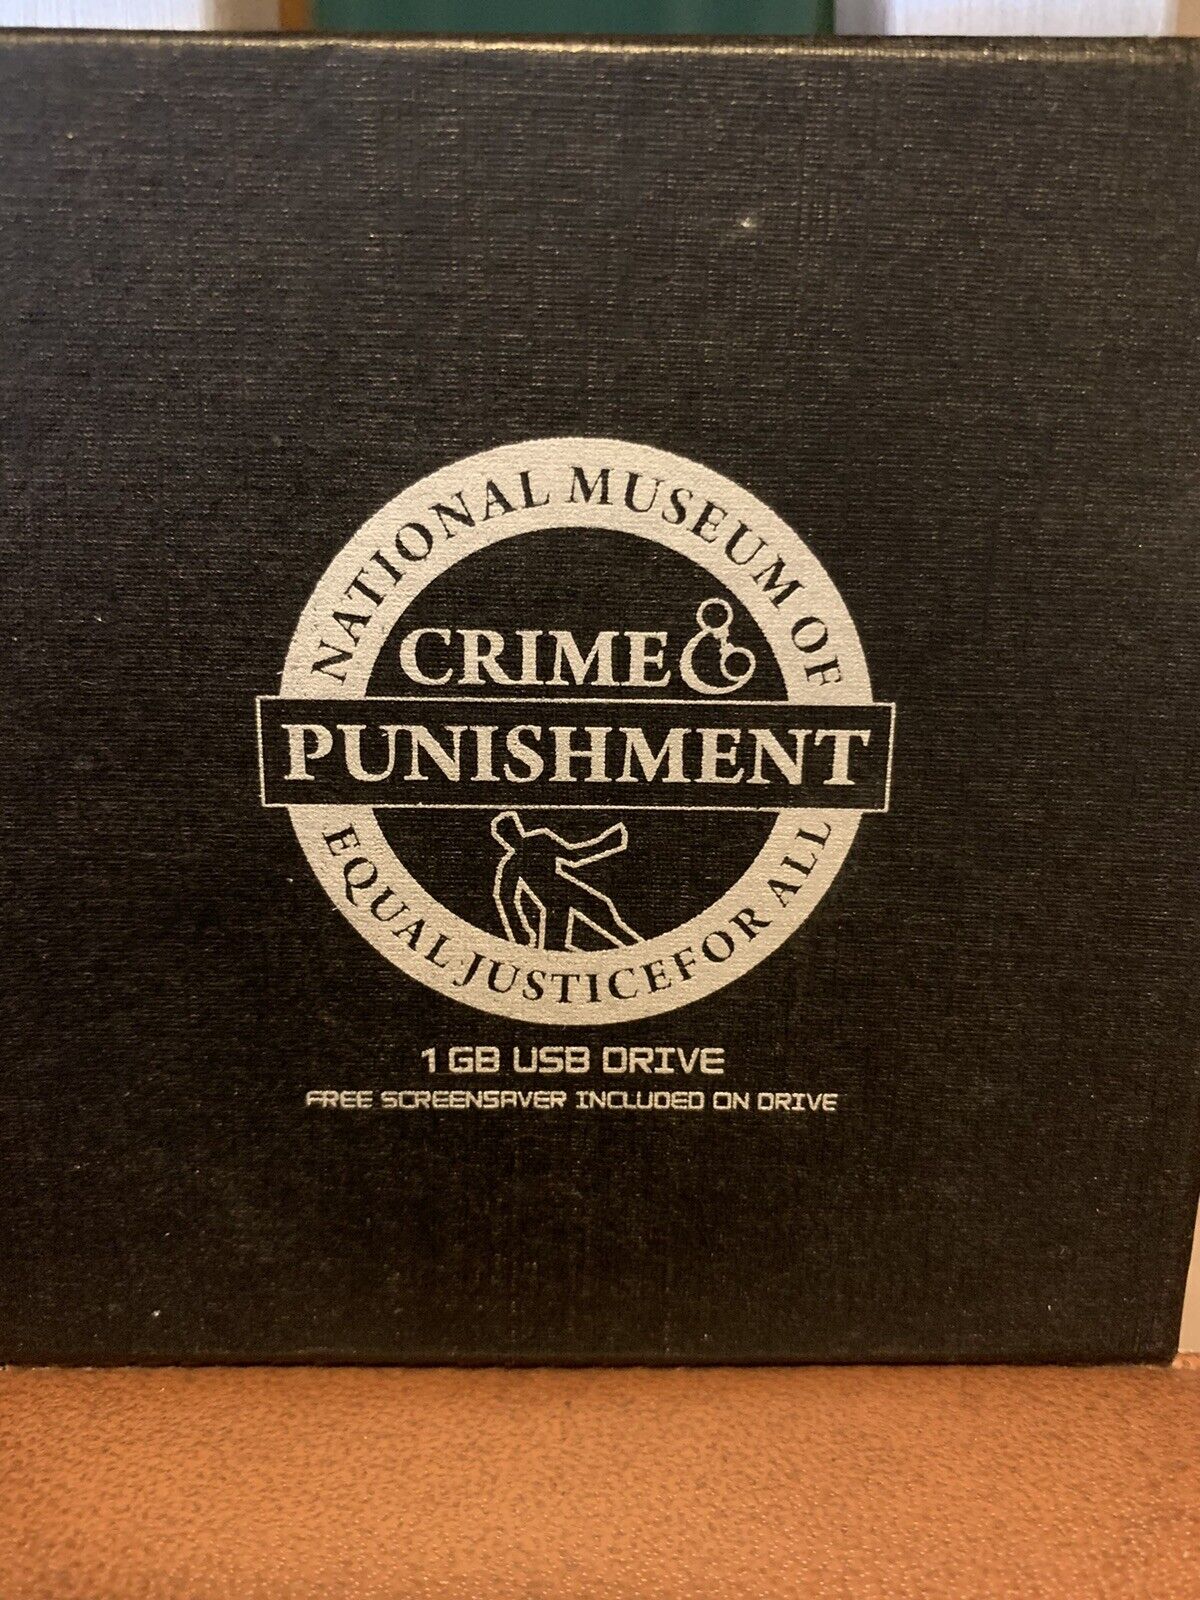 National Museum Of Crime And Punishment 1 Gb USB Drive Handcuffs